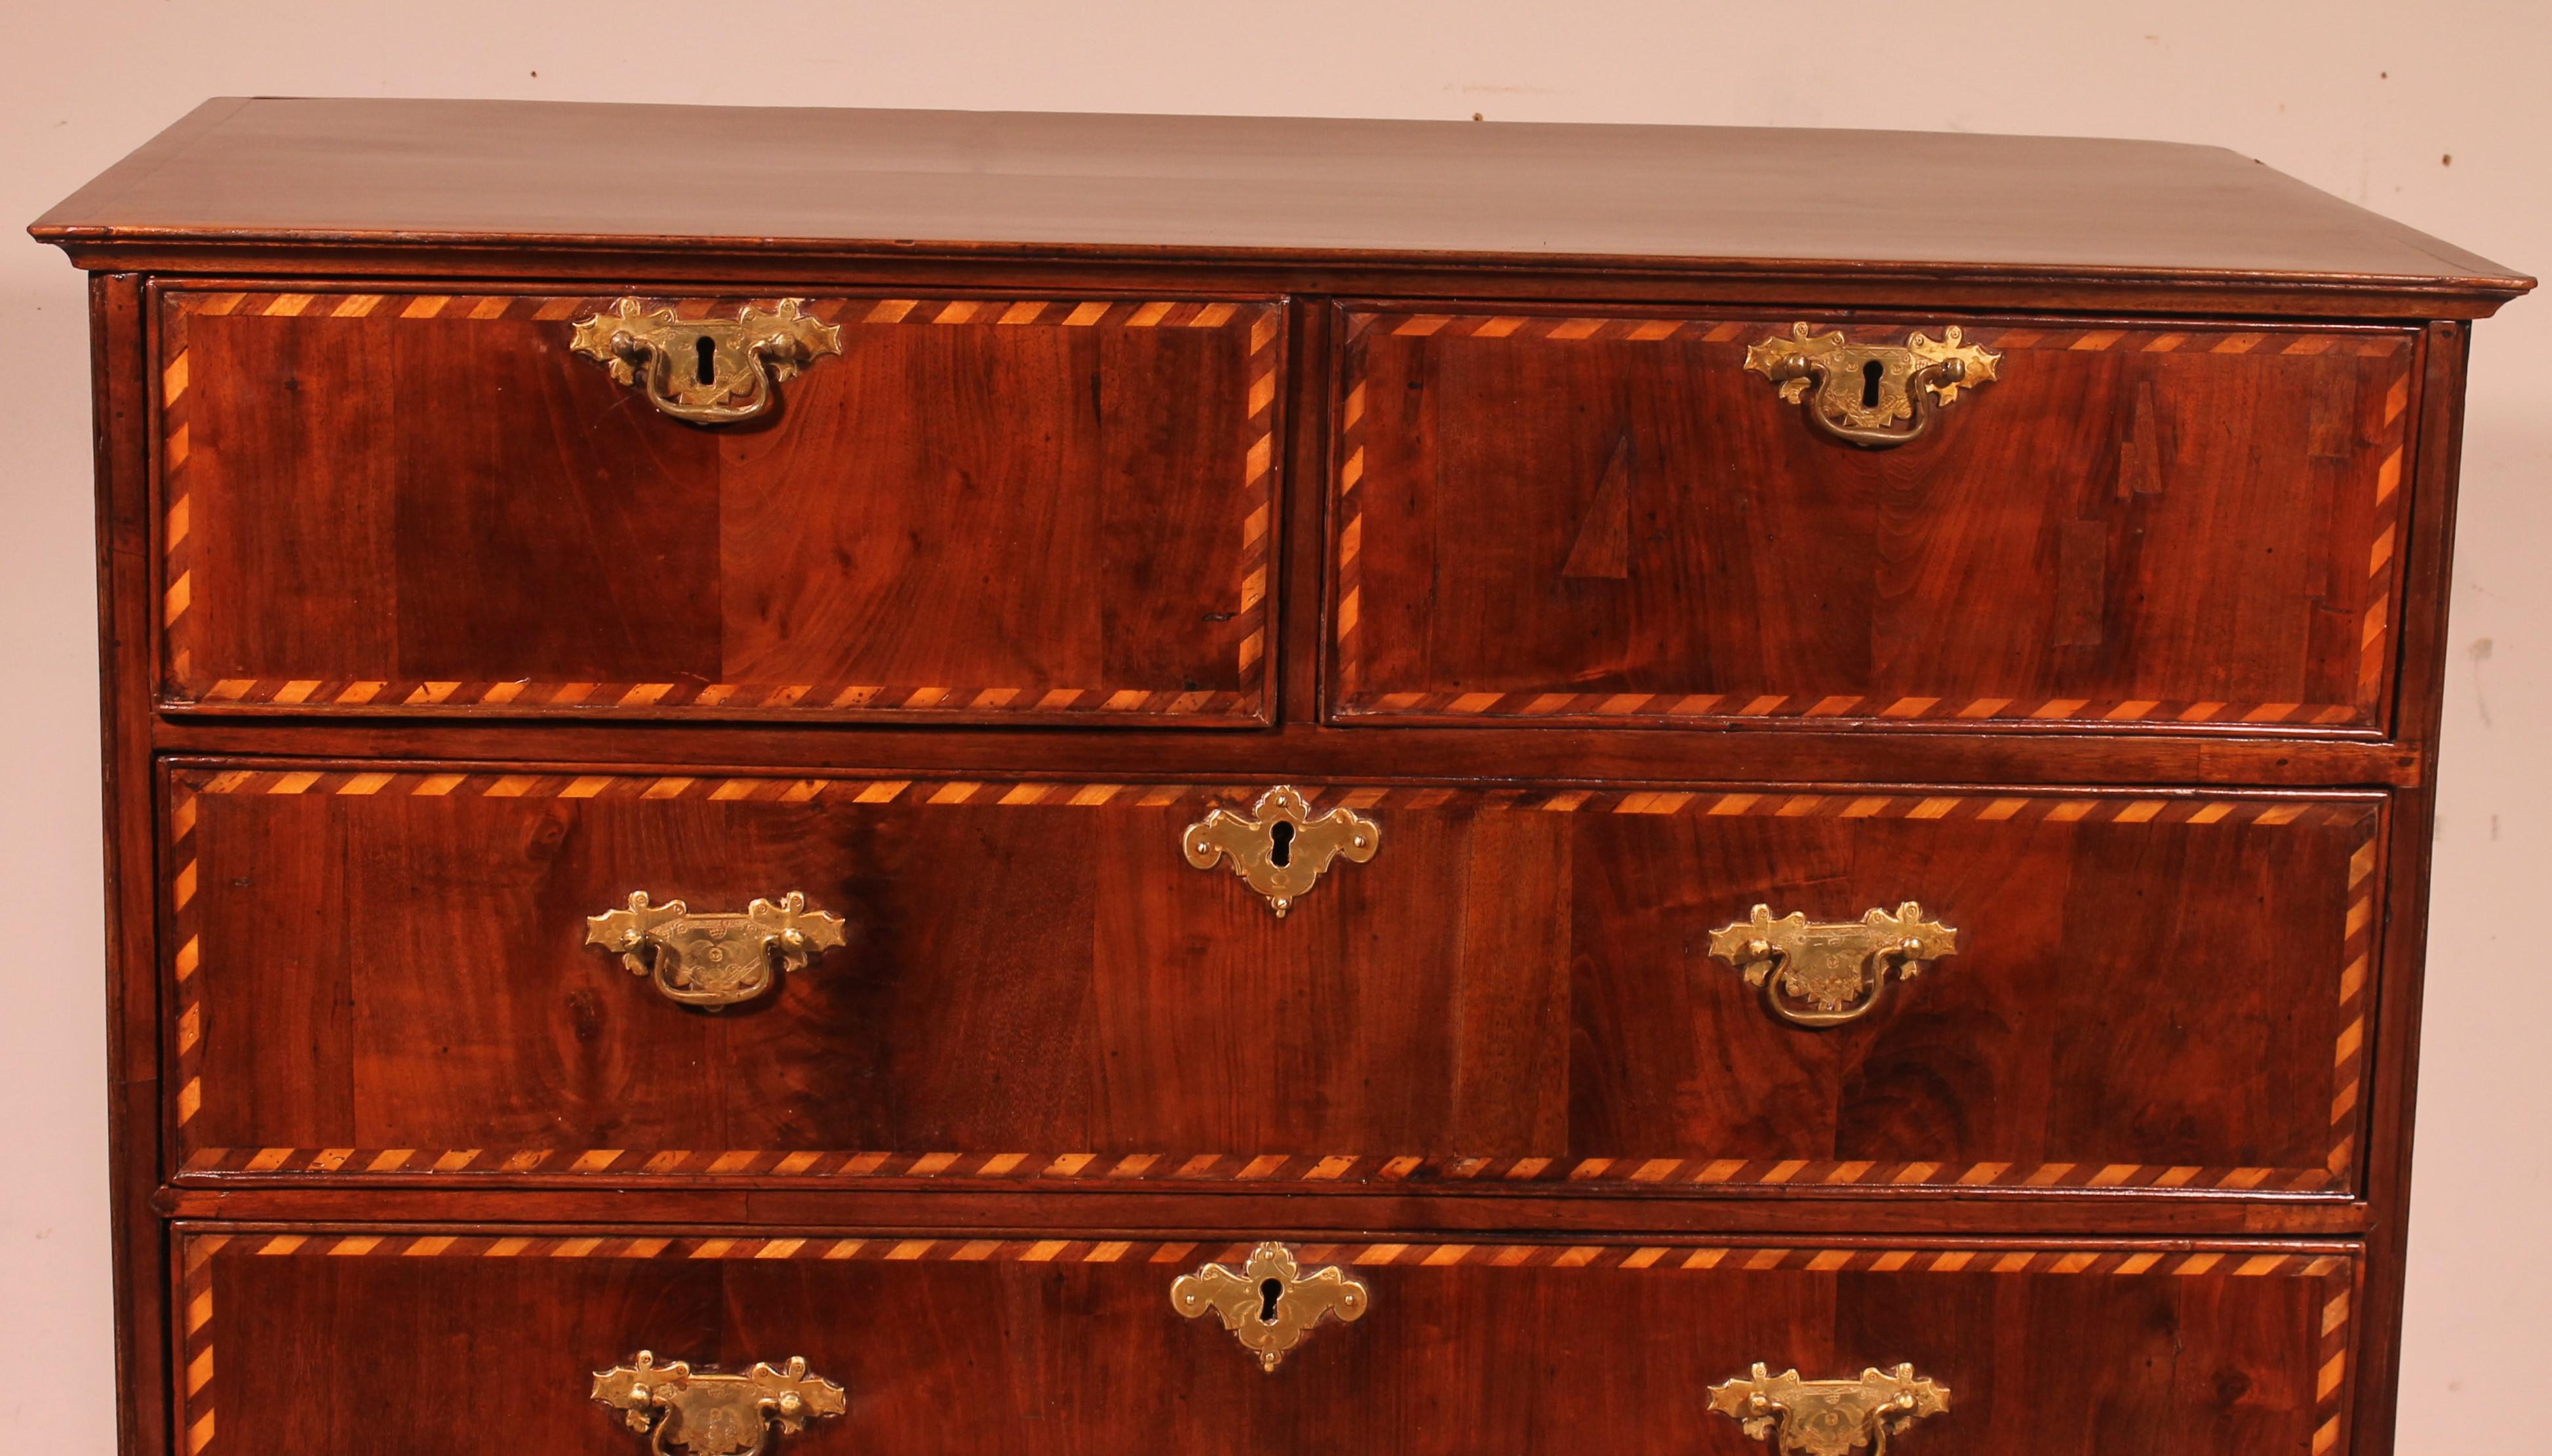 Superb and rare Queen Anne period chest of drawers from the end of the 17th century beginning of the 18th century circa 1700.

Chest of drawers of superb quality with a very beautiful walnut and each drawer is decorated with inlays of lemon tree